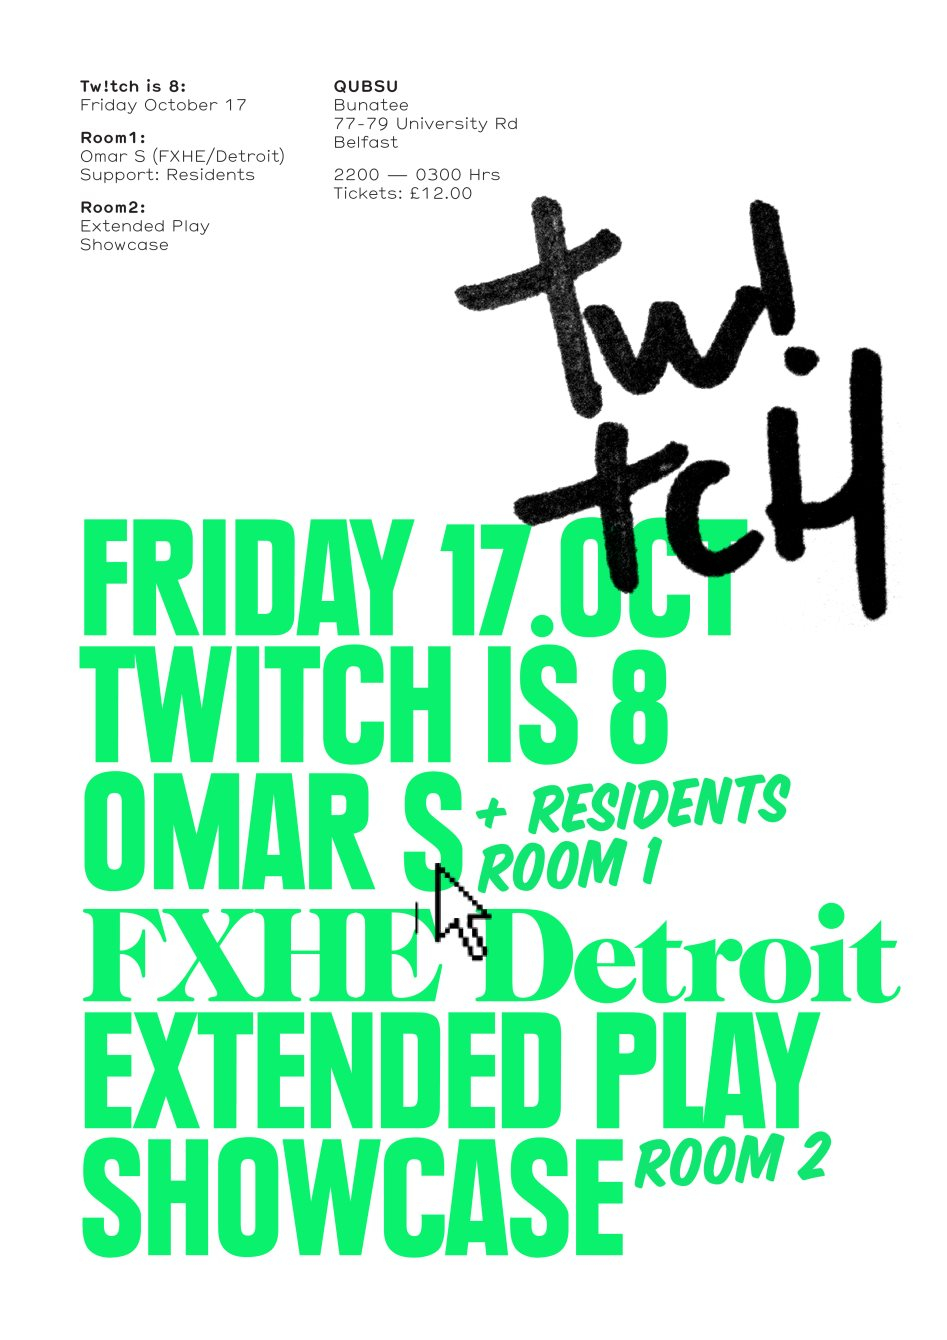 Tw!tch is 8! with Omar S - Flyer front